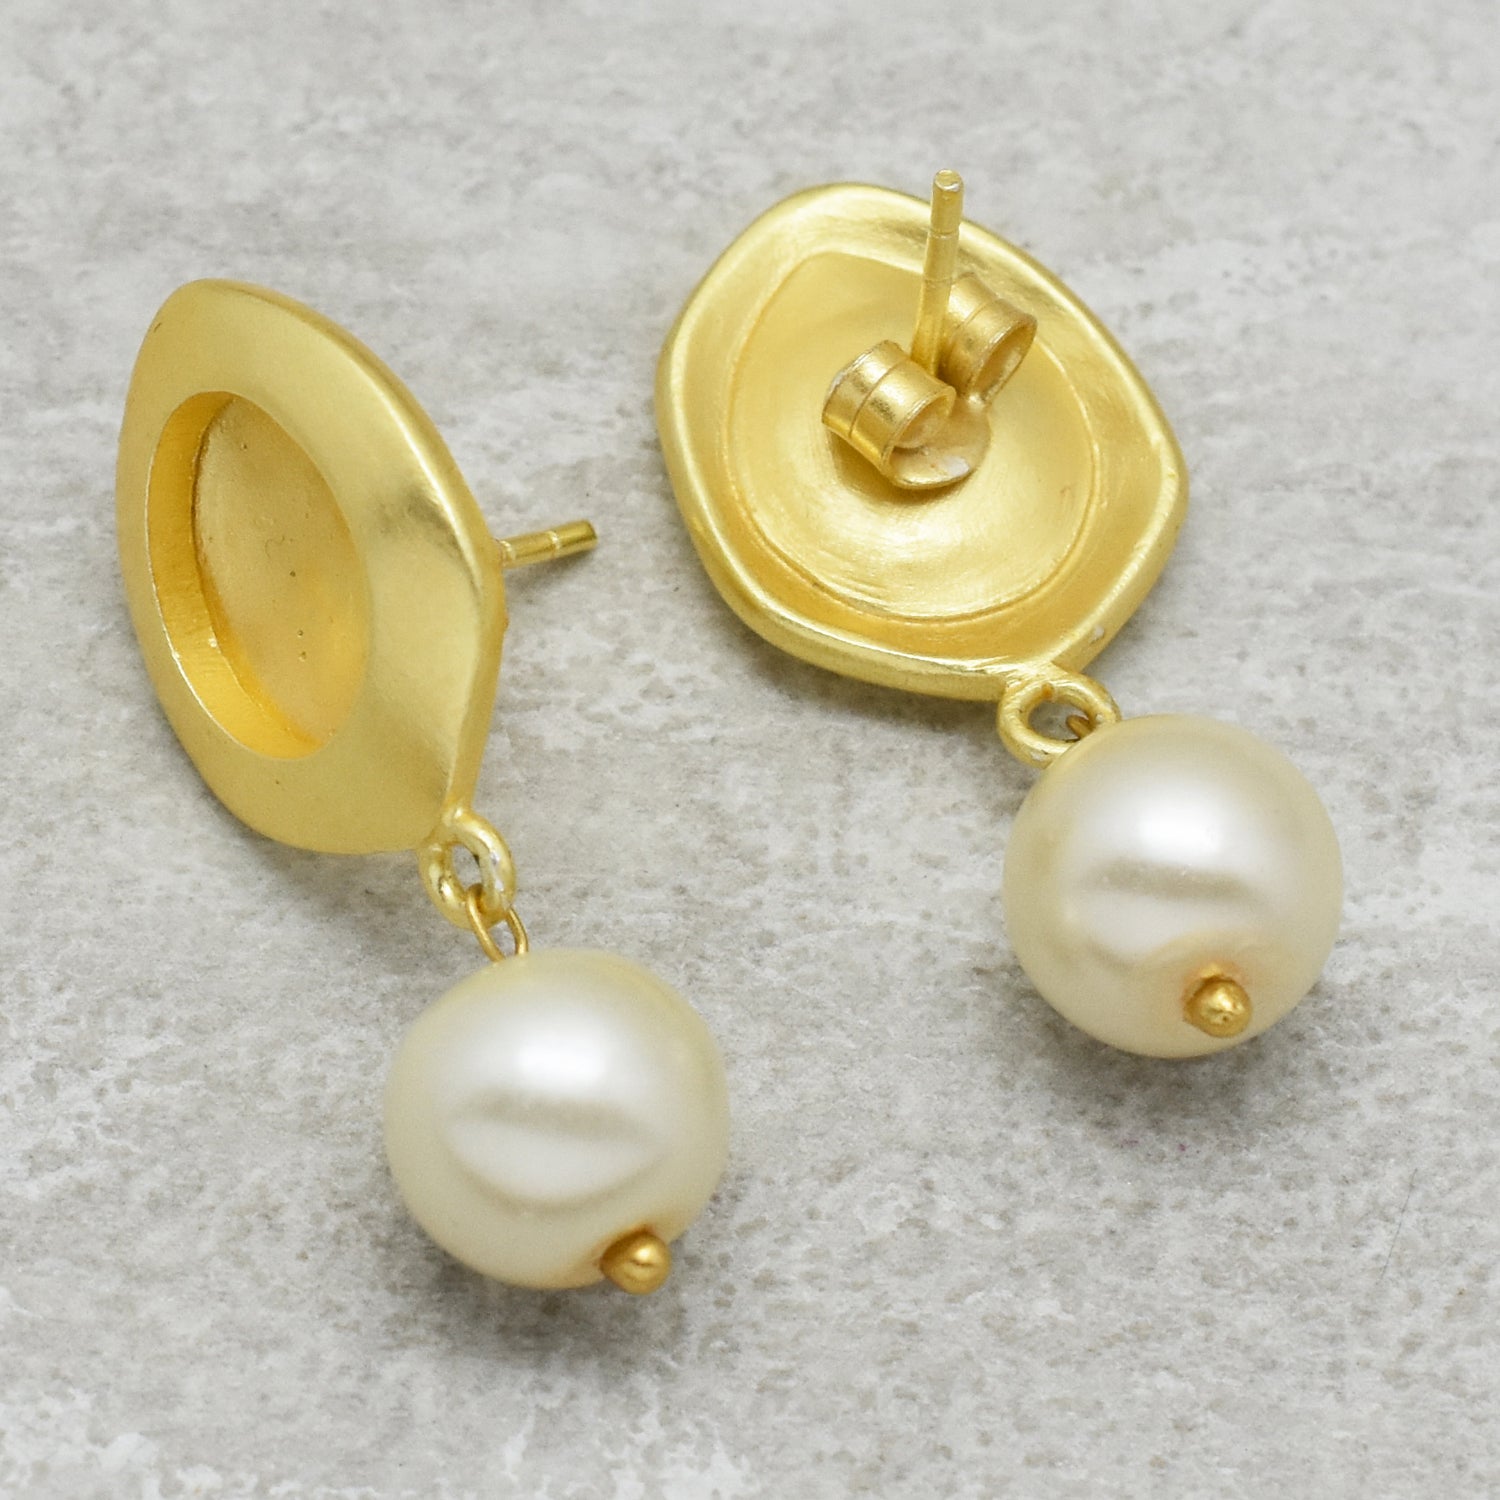 Satisfy your passion for pearl jewelry, Jan. 10